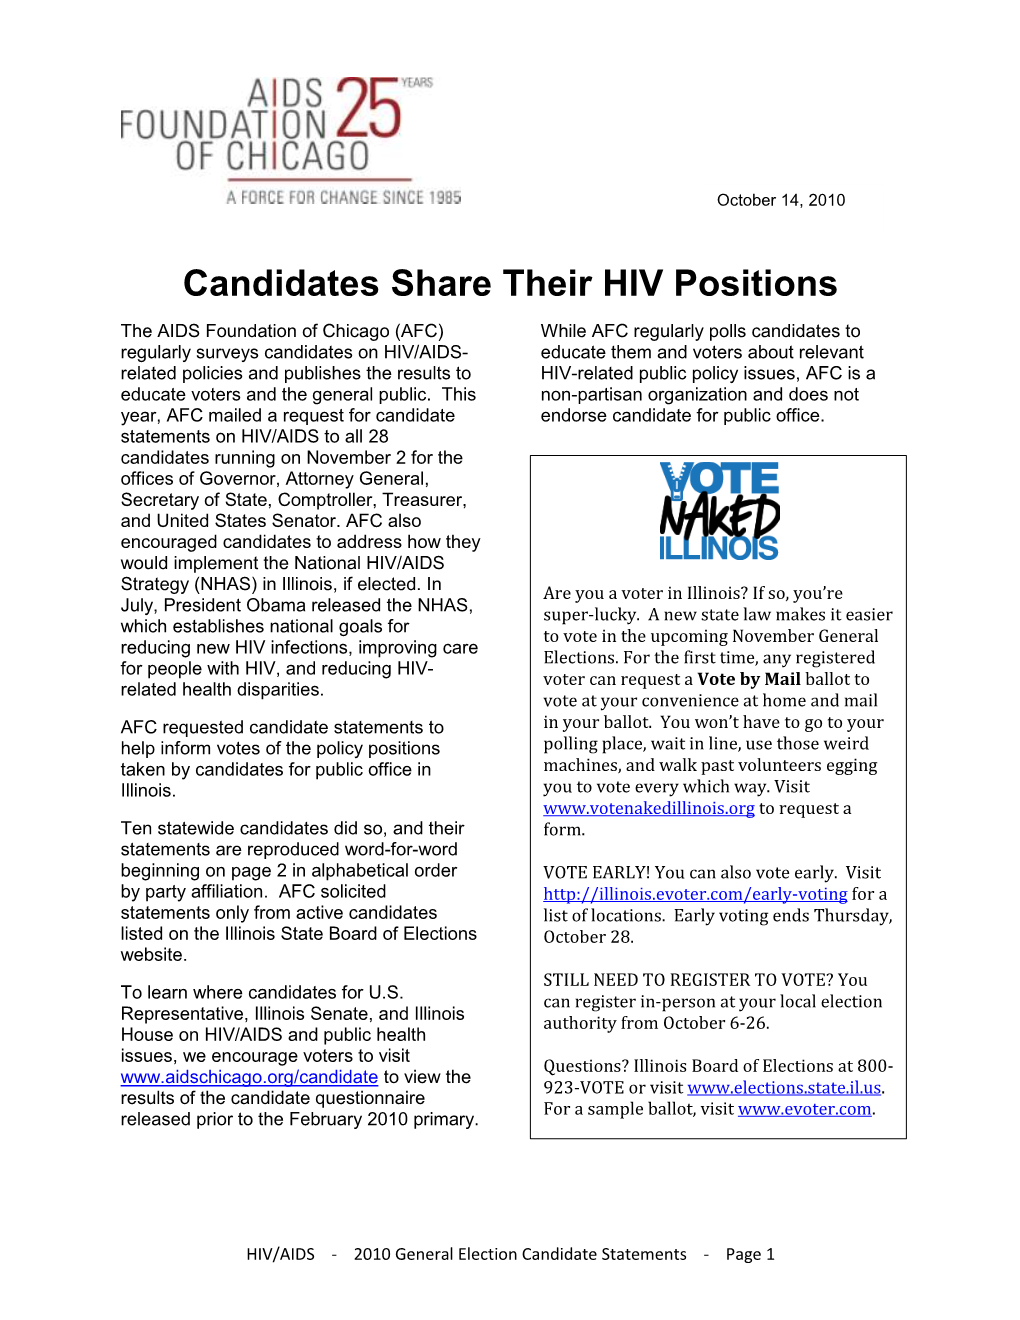 Candidates Share Their HIV Positions